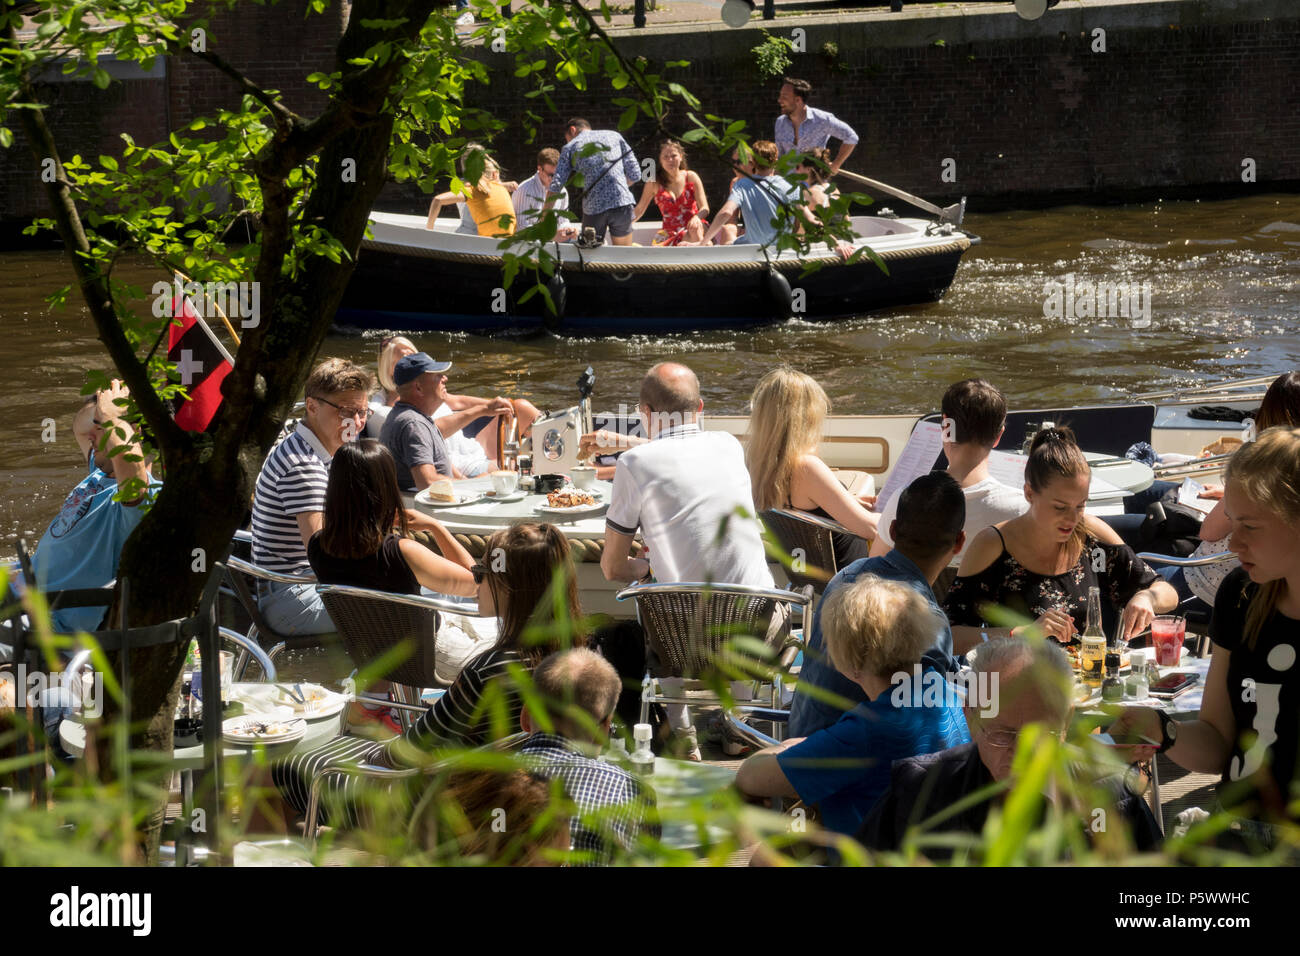 AMSTERDAM, NETHERLANDS - MAI 10, 2018: tourists take a drink in the sun on the terrace of a cafe on the banks of a canal in Amsterdam Stock Photo